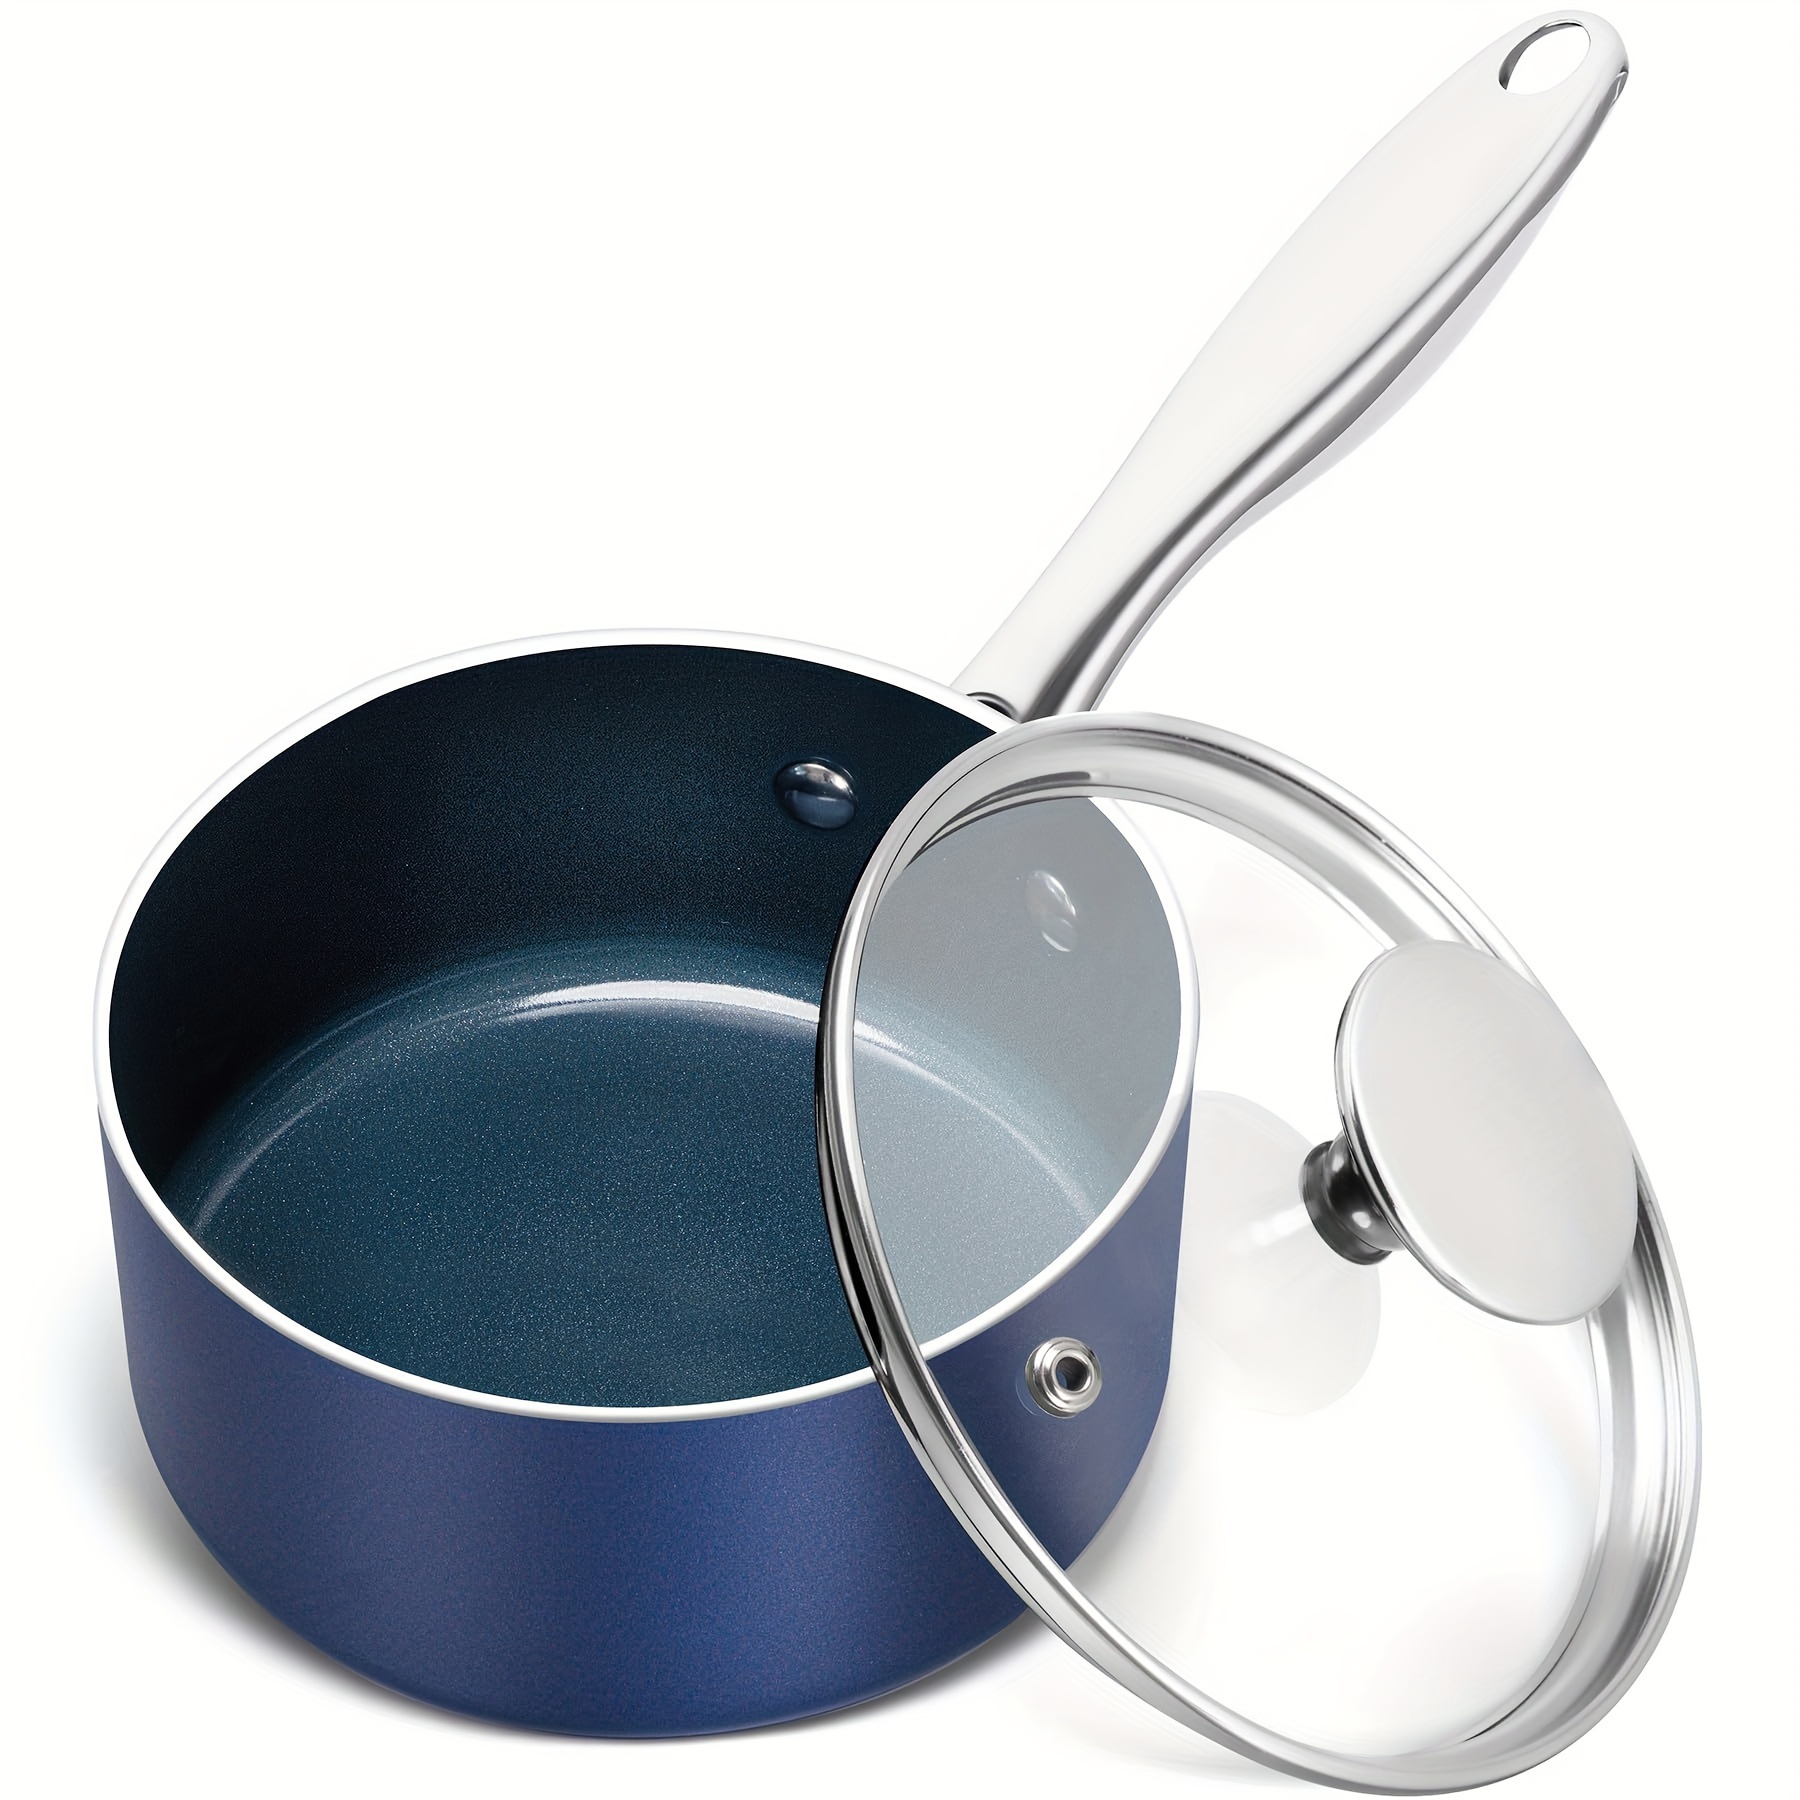 

Sauce Pan Sets, Ceramic Saucepans With Lids, Sauce Pans With Lid, Nonstick Saucepan Set, Small Pot With Stainless Steel Handle, Oven Safe, Blue